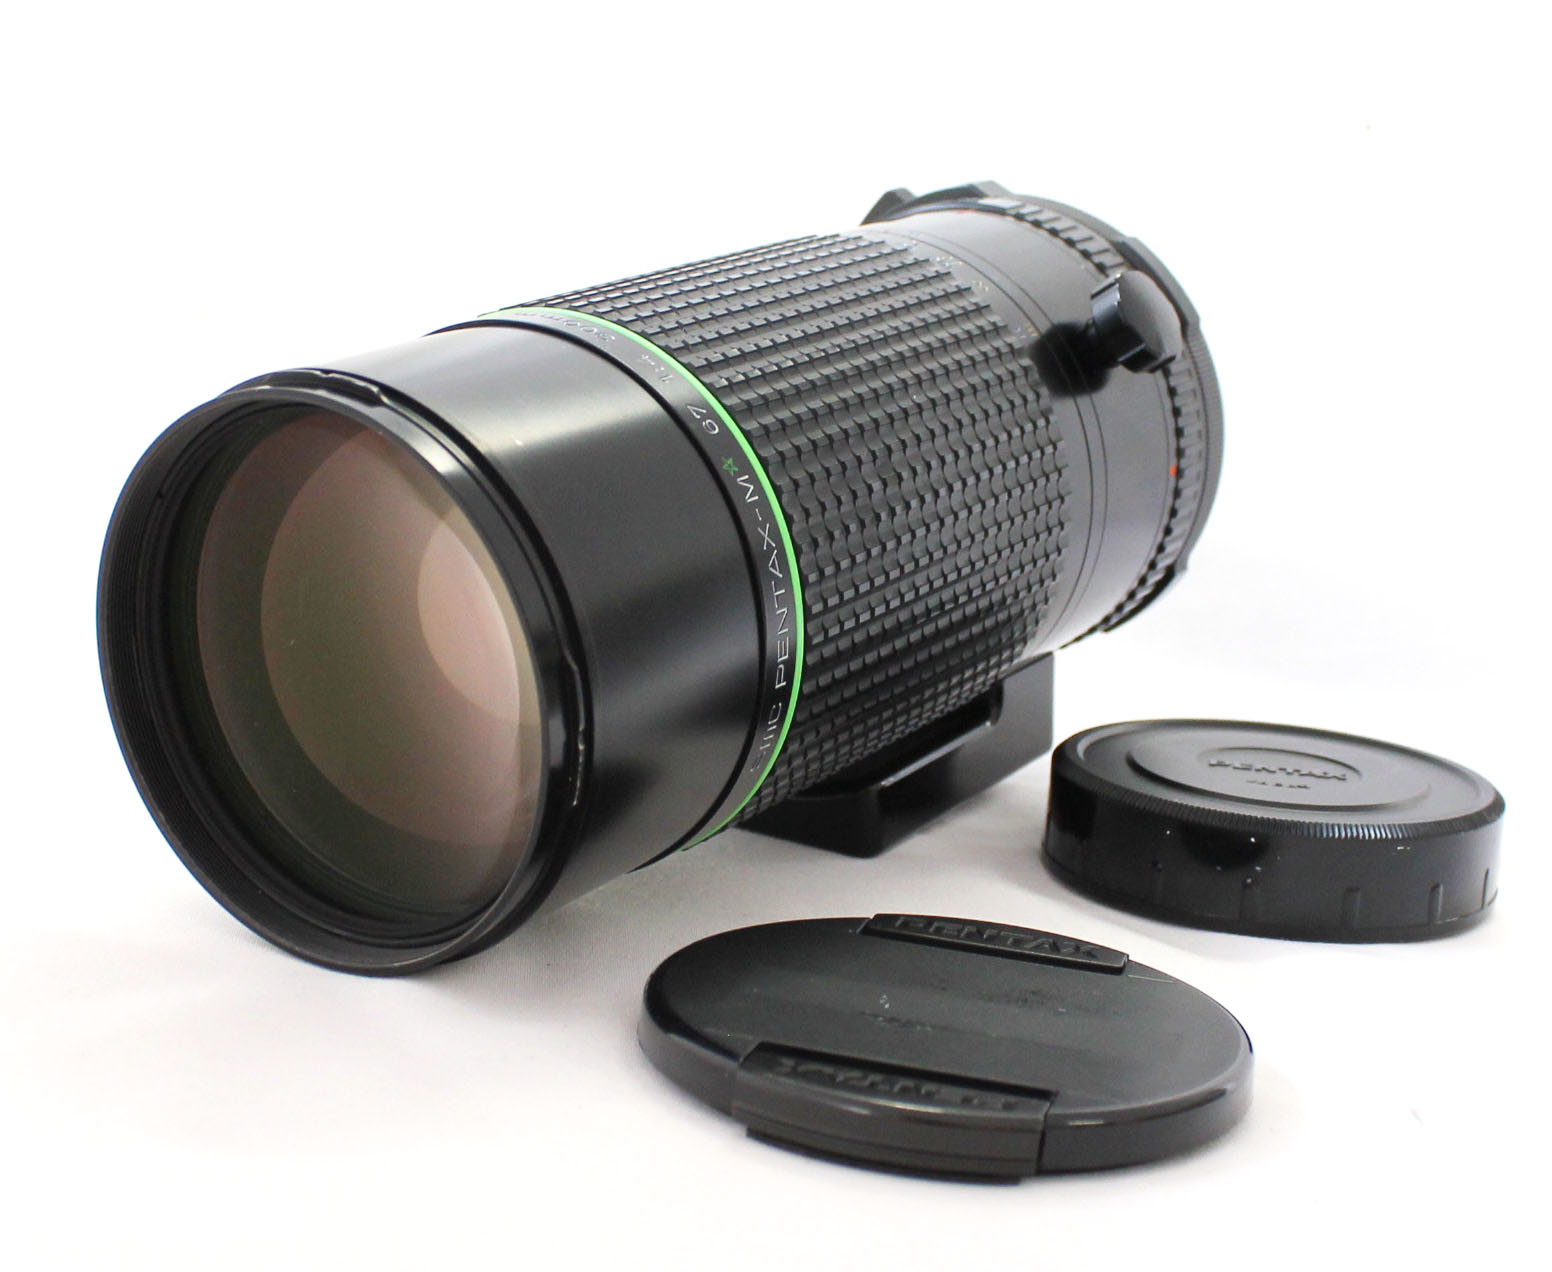 SMC Pentax-M* 67 300mm F/4 ED IF Green Star Lens for 6x7 67 II from Japan